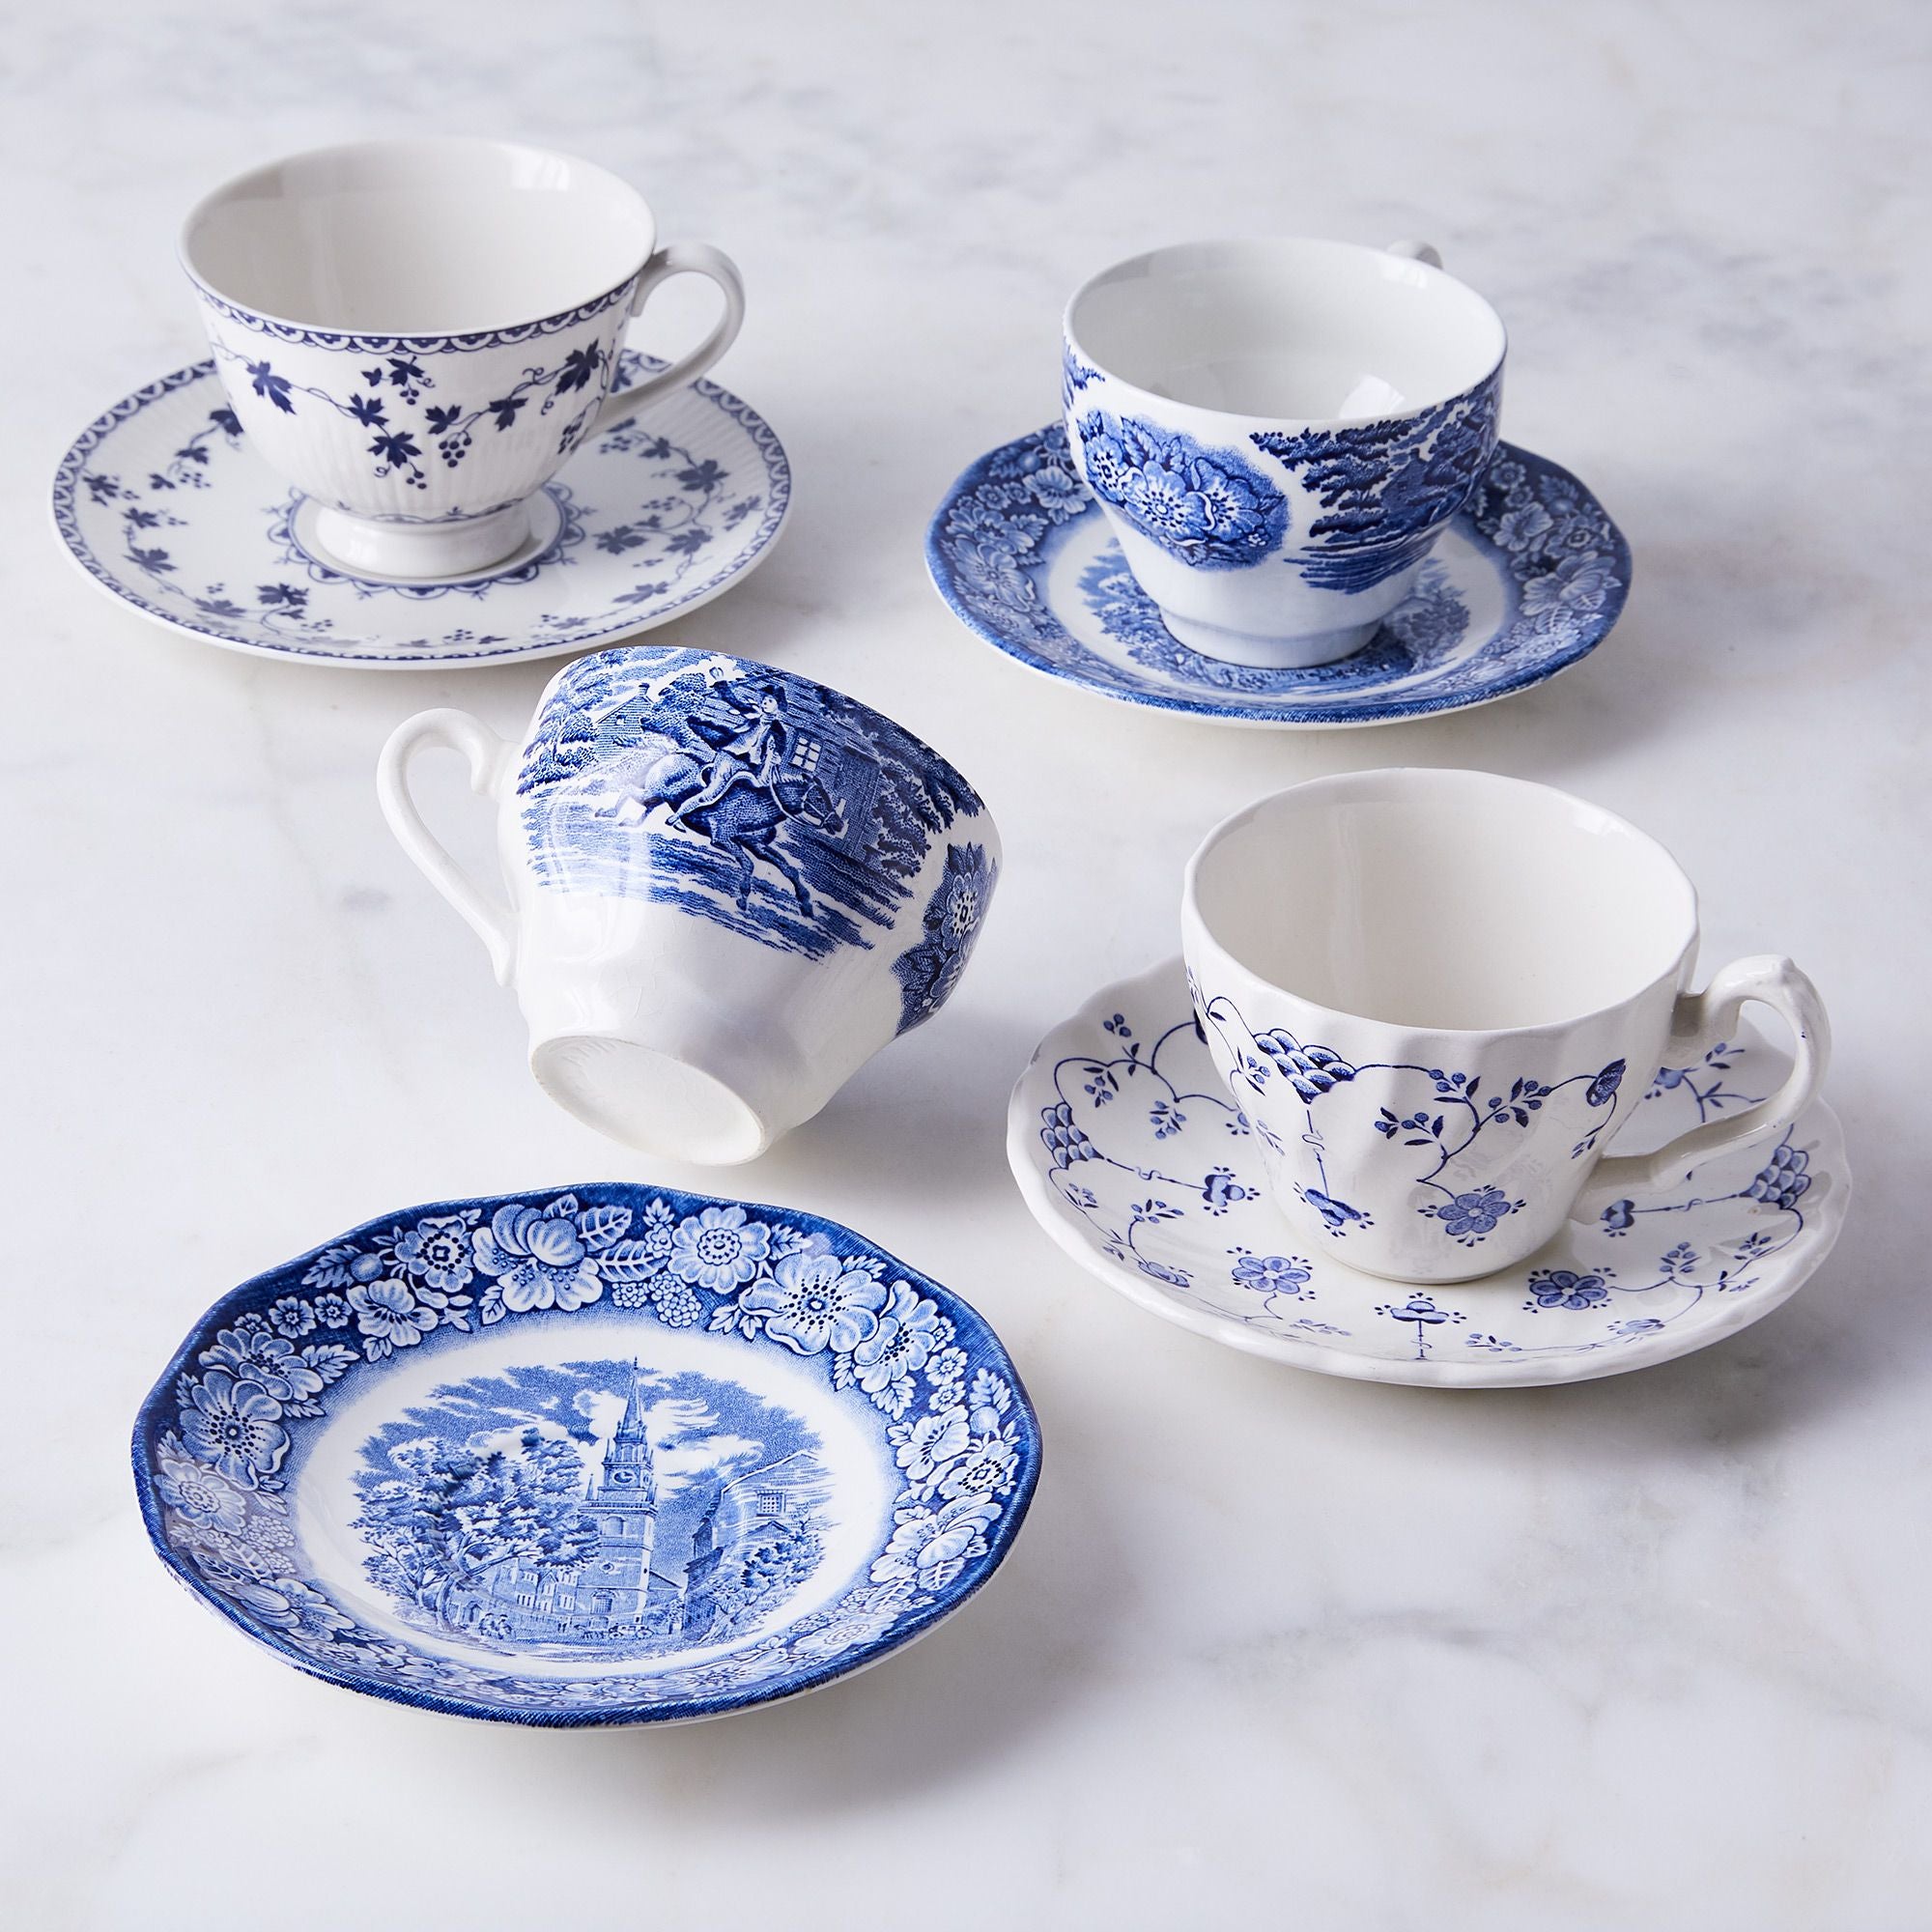 four blue and white teacups and saucers